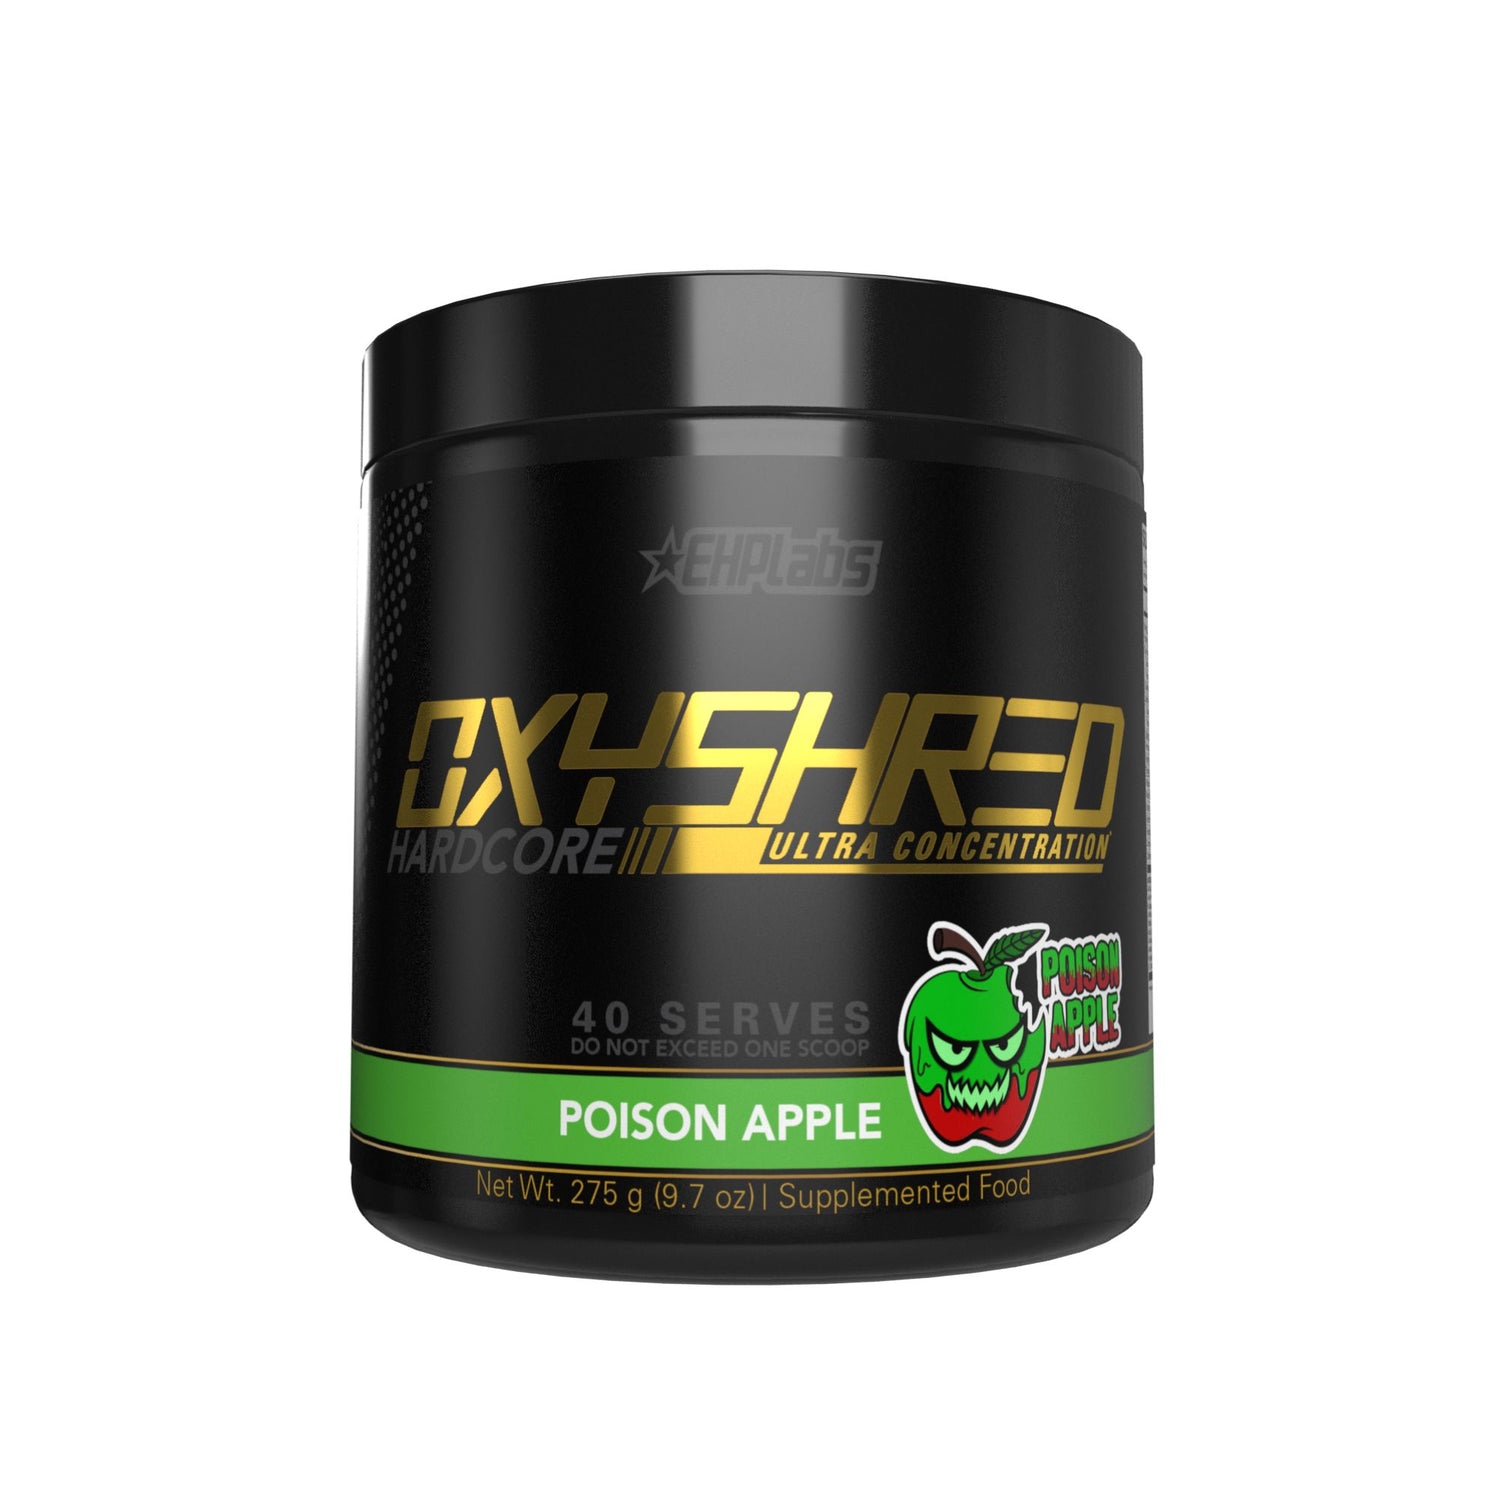 EHP Labs Oxyshred Hardcore Thermogenic